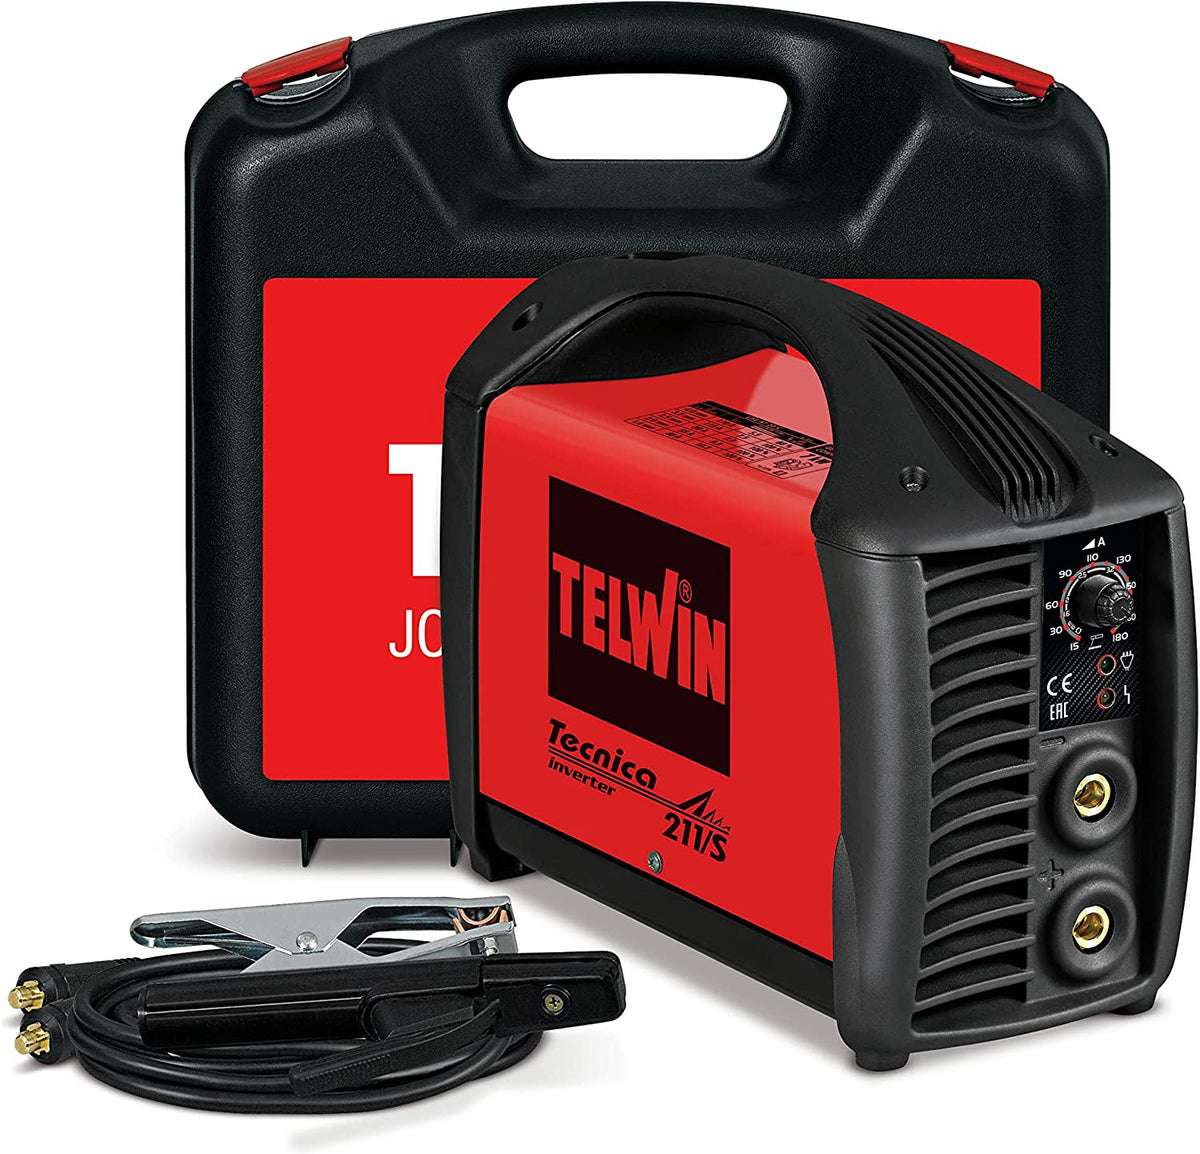 Tecnica 211/S 230V Inverter Welding Machine with Carry Case - Telwin - 816122